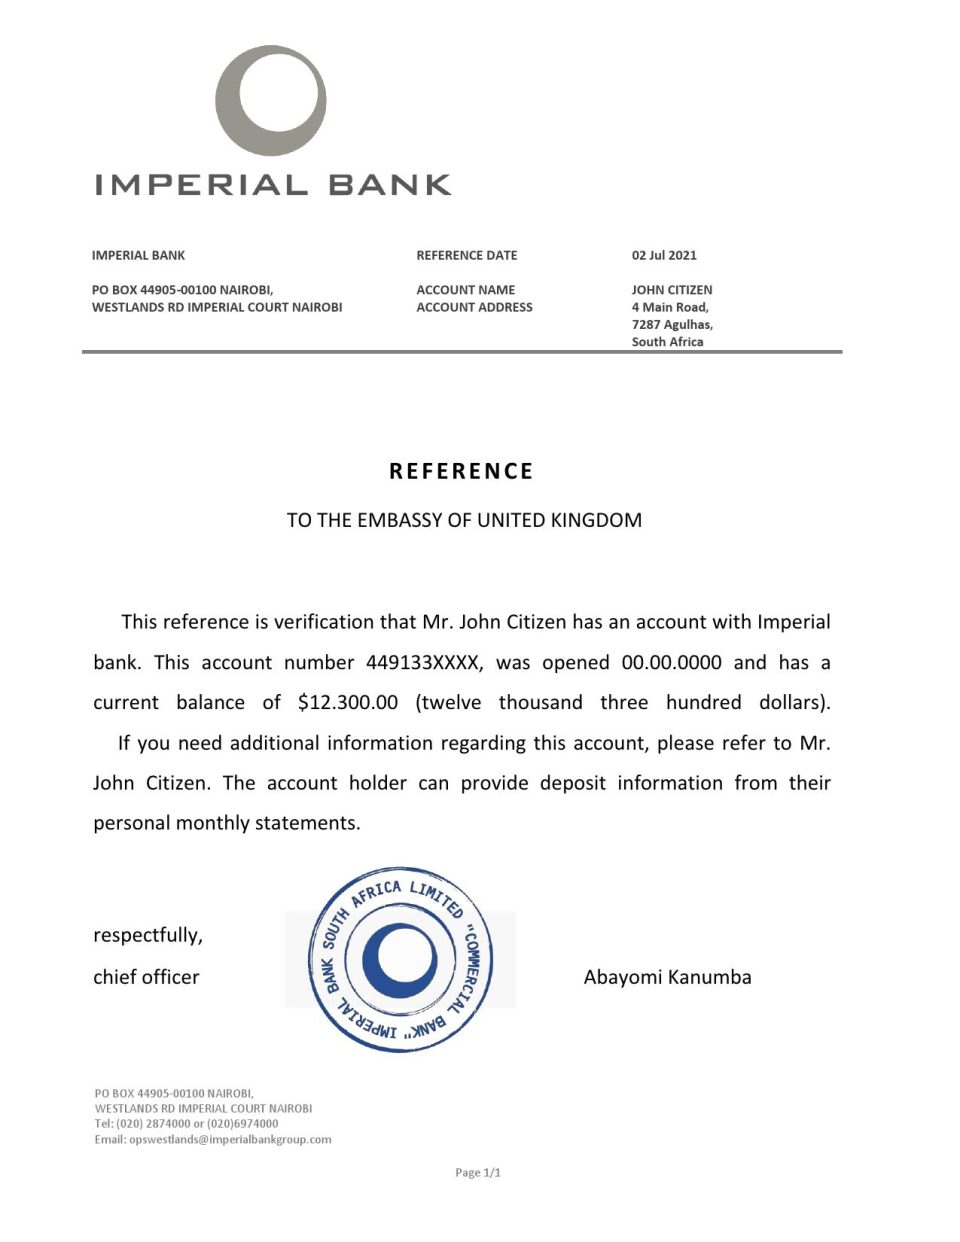 Download South Africa Imperial Bank Reference Letter Templates | Editable Word